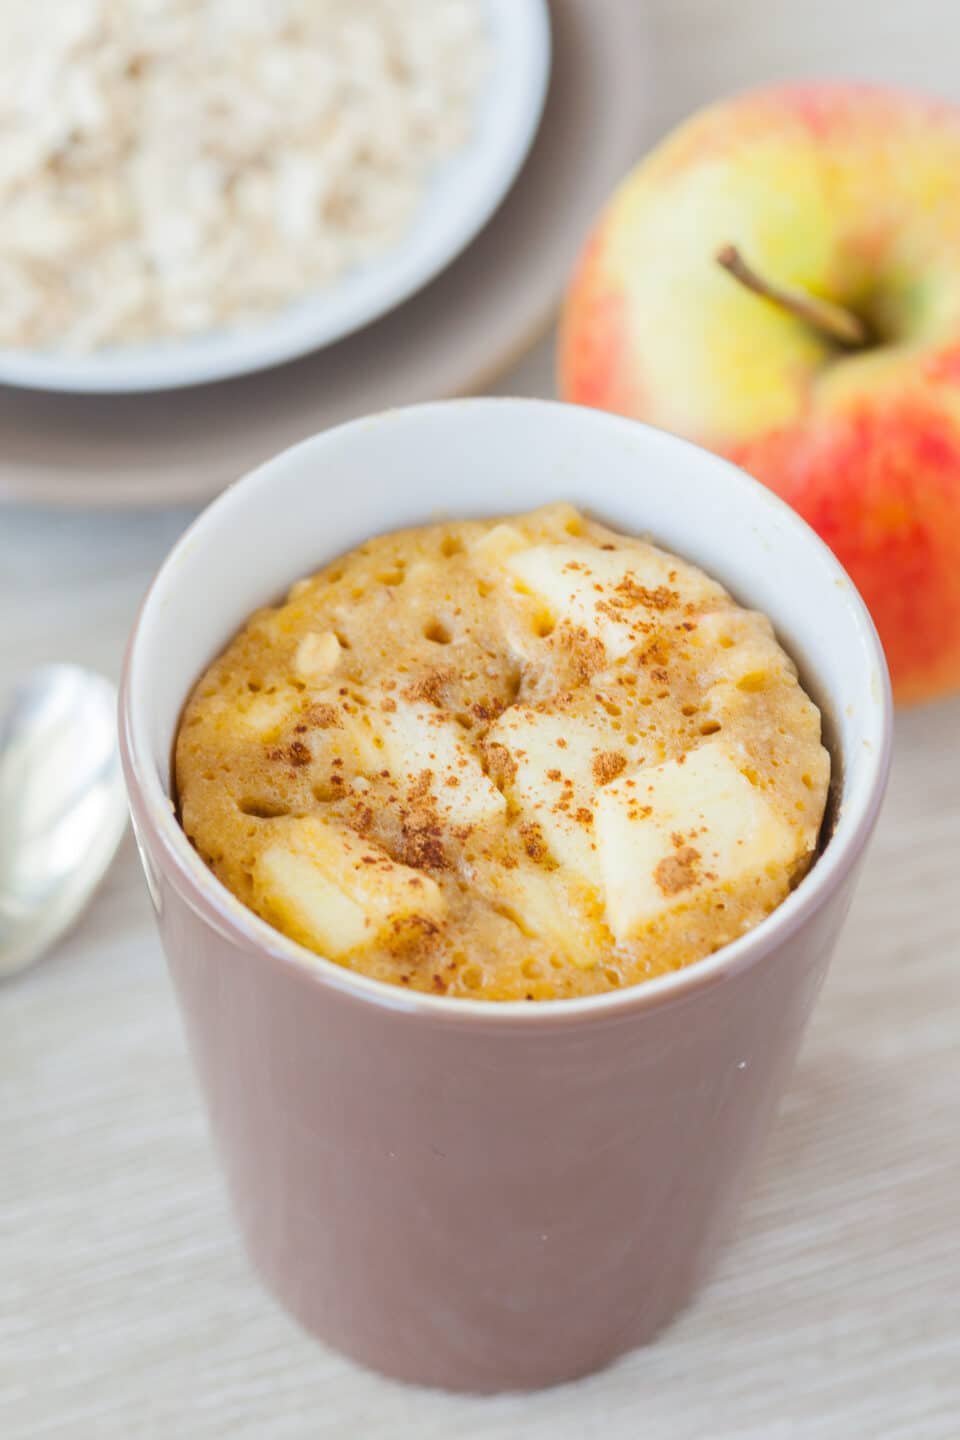 Fast Recipe with Apples